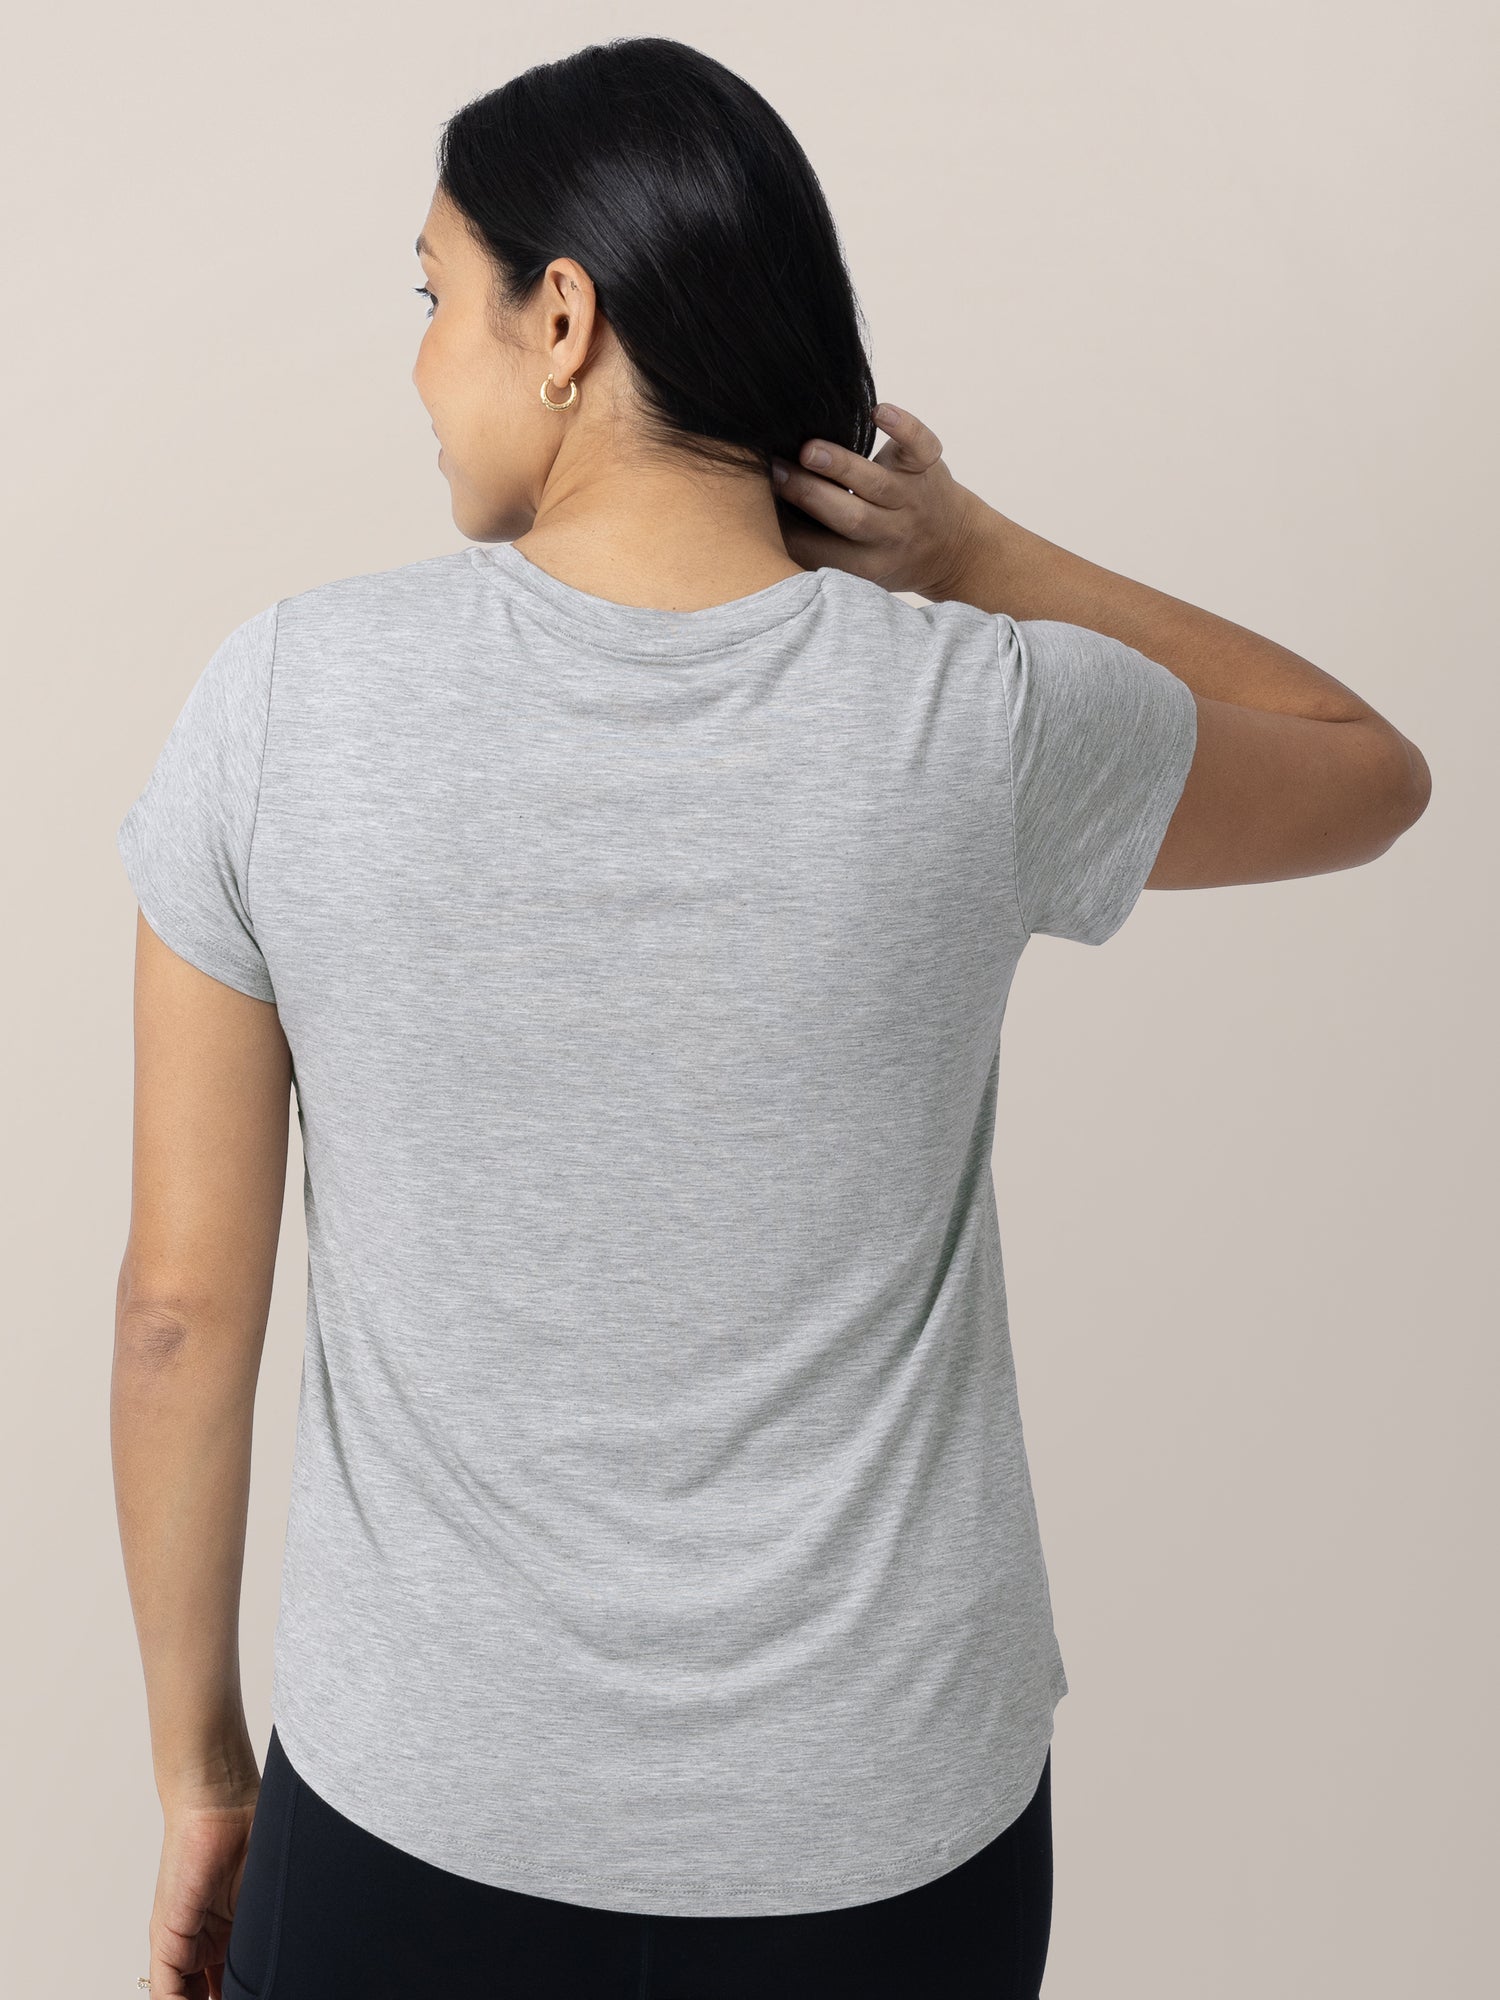 Back of a model wearing the Everyday Maternity & Nursing T-shirt in Grey Heather